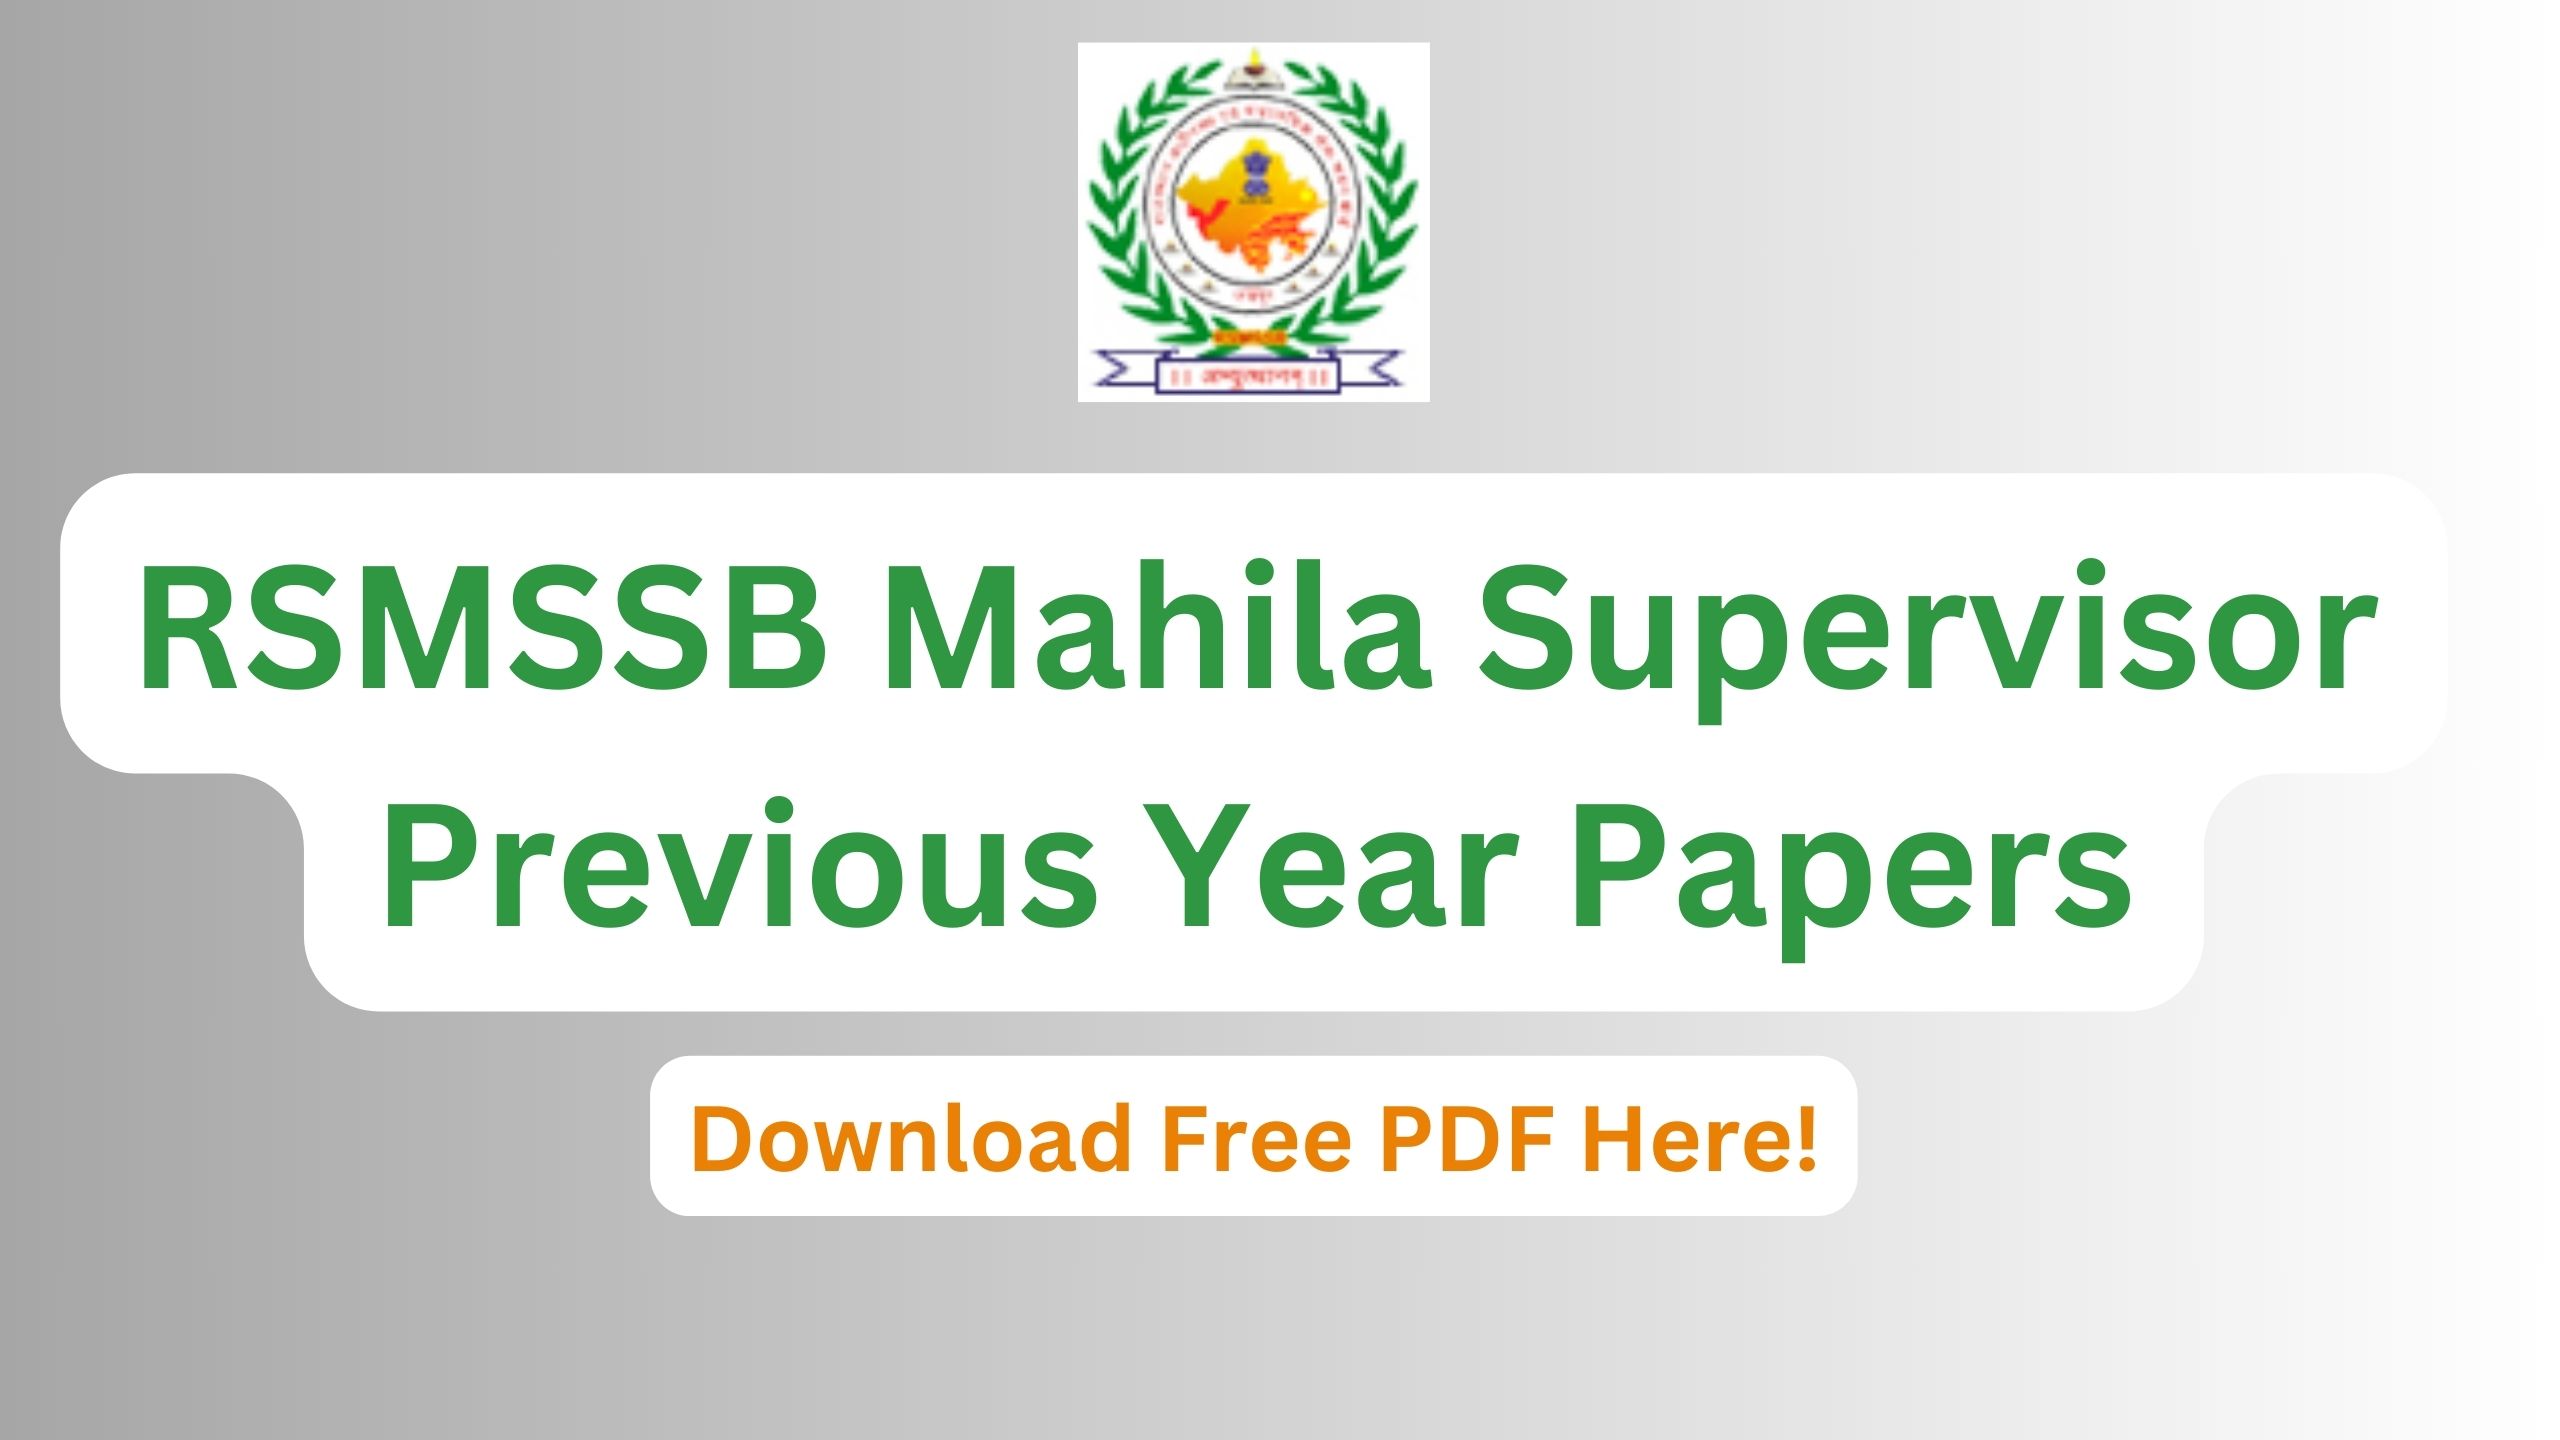 RSMSSB Mahila Supervisor Previous Year Papers, Download Free PDF Here!